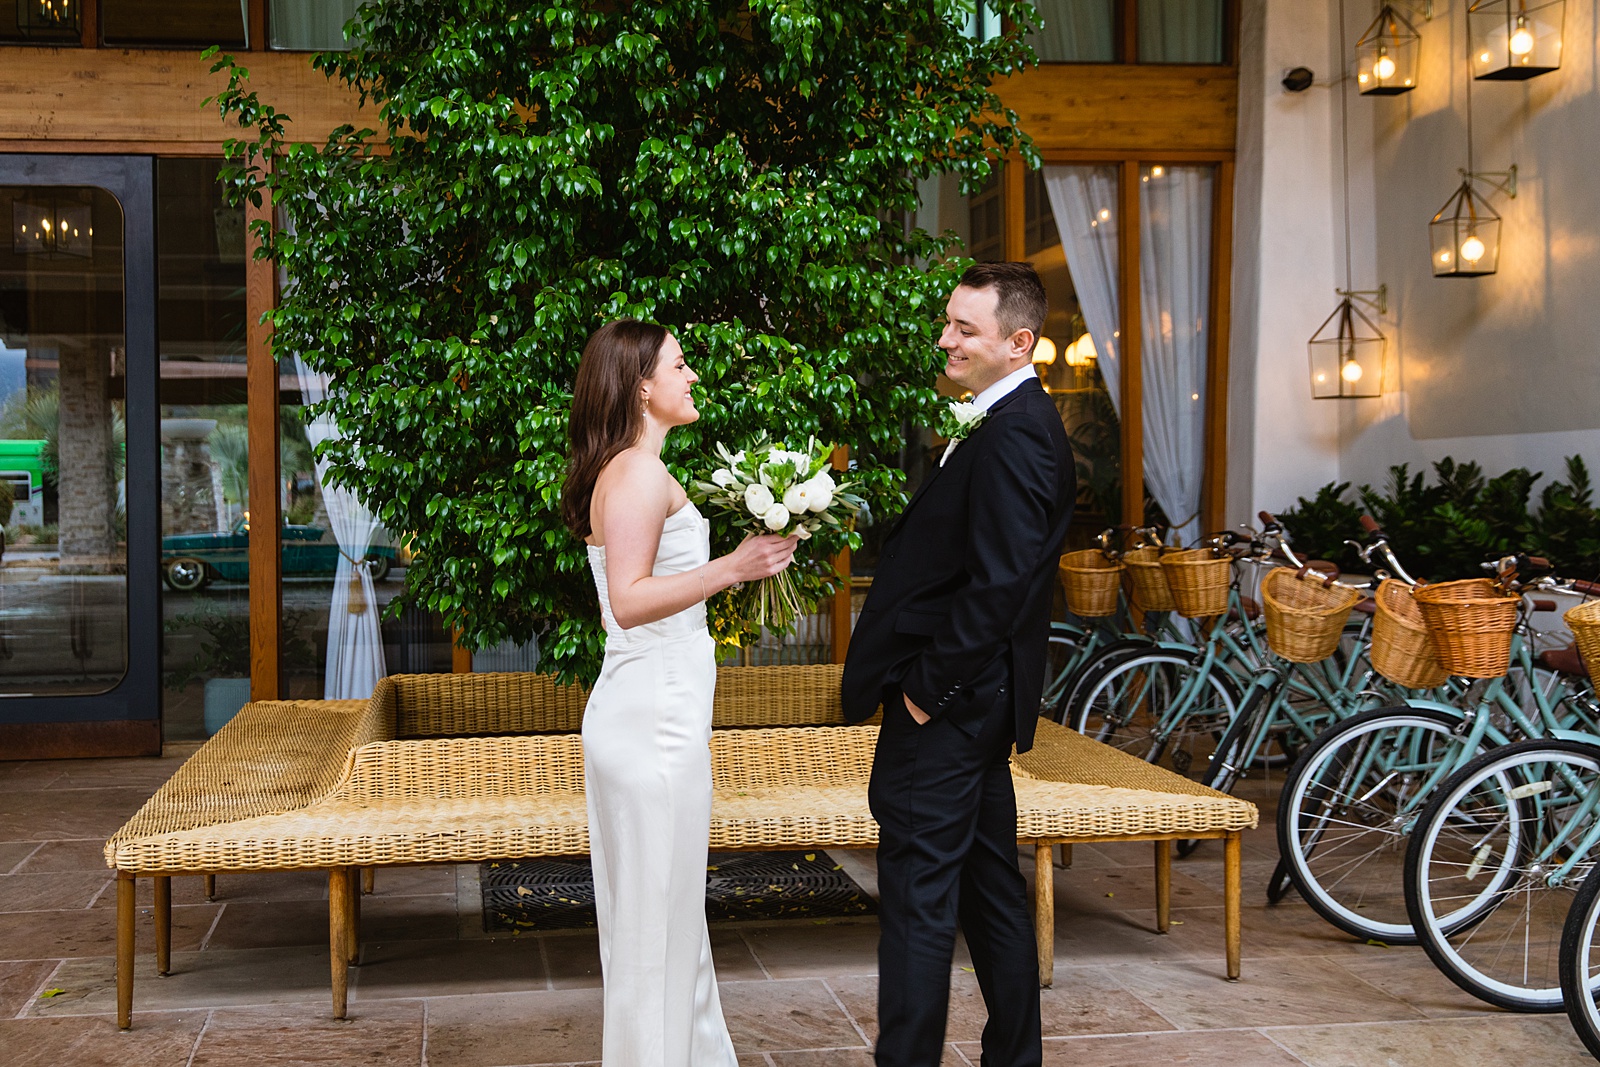 Bride & Groom's first look at The Scott by Arizona wedding photographer PMA Photography.